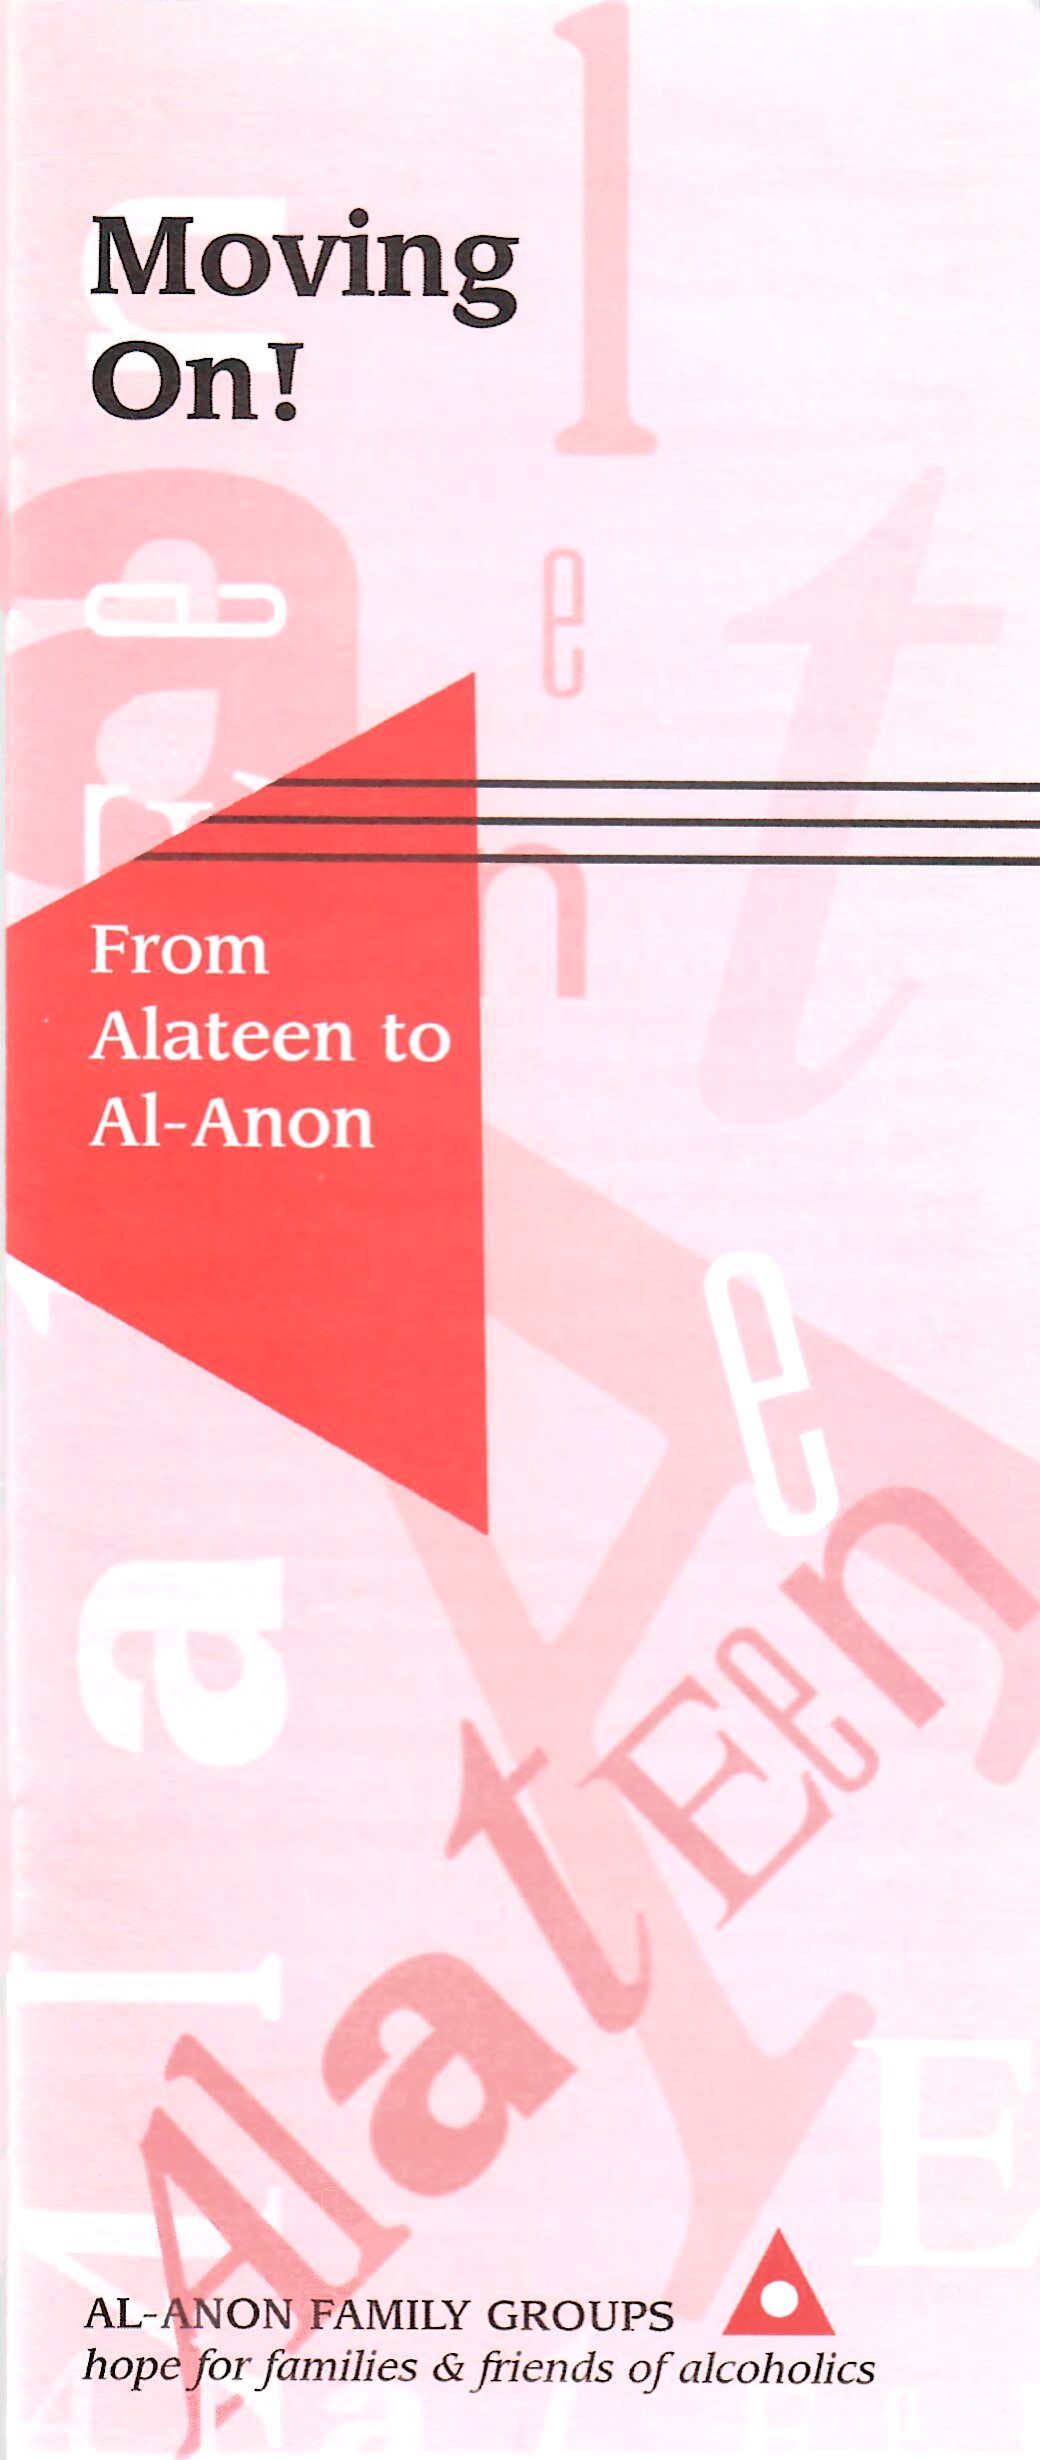 Moving On! From Alateen to Al-Anon P-59